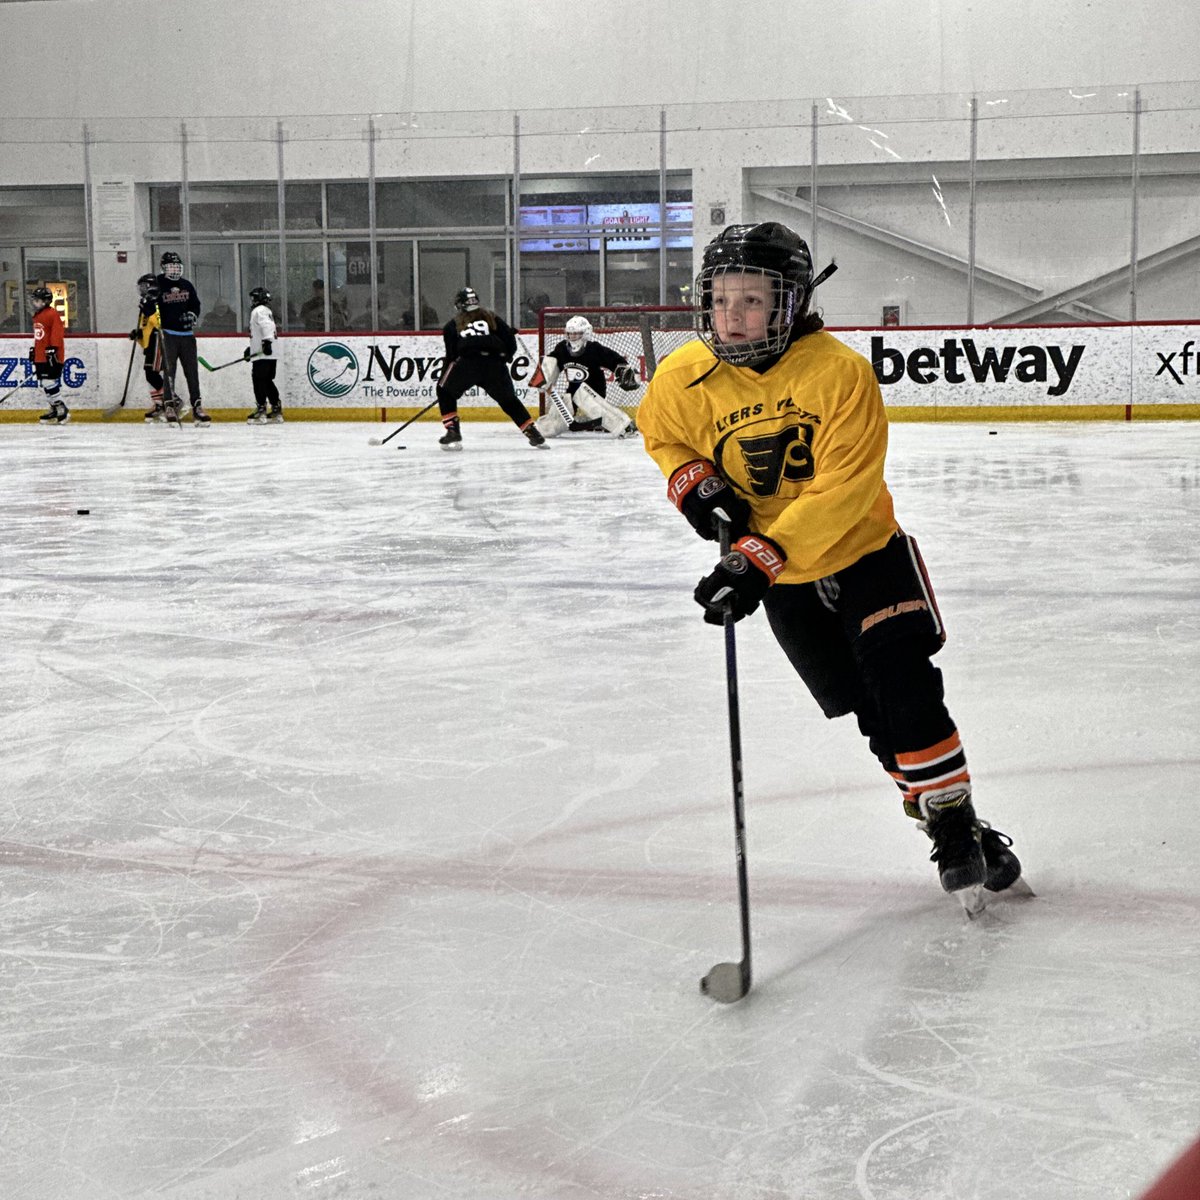 That’s a wrap for Flyers Youth Hockey Club tryouts! Good luck to all players as they head into the offseason and join their new teams in the fall!